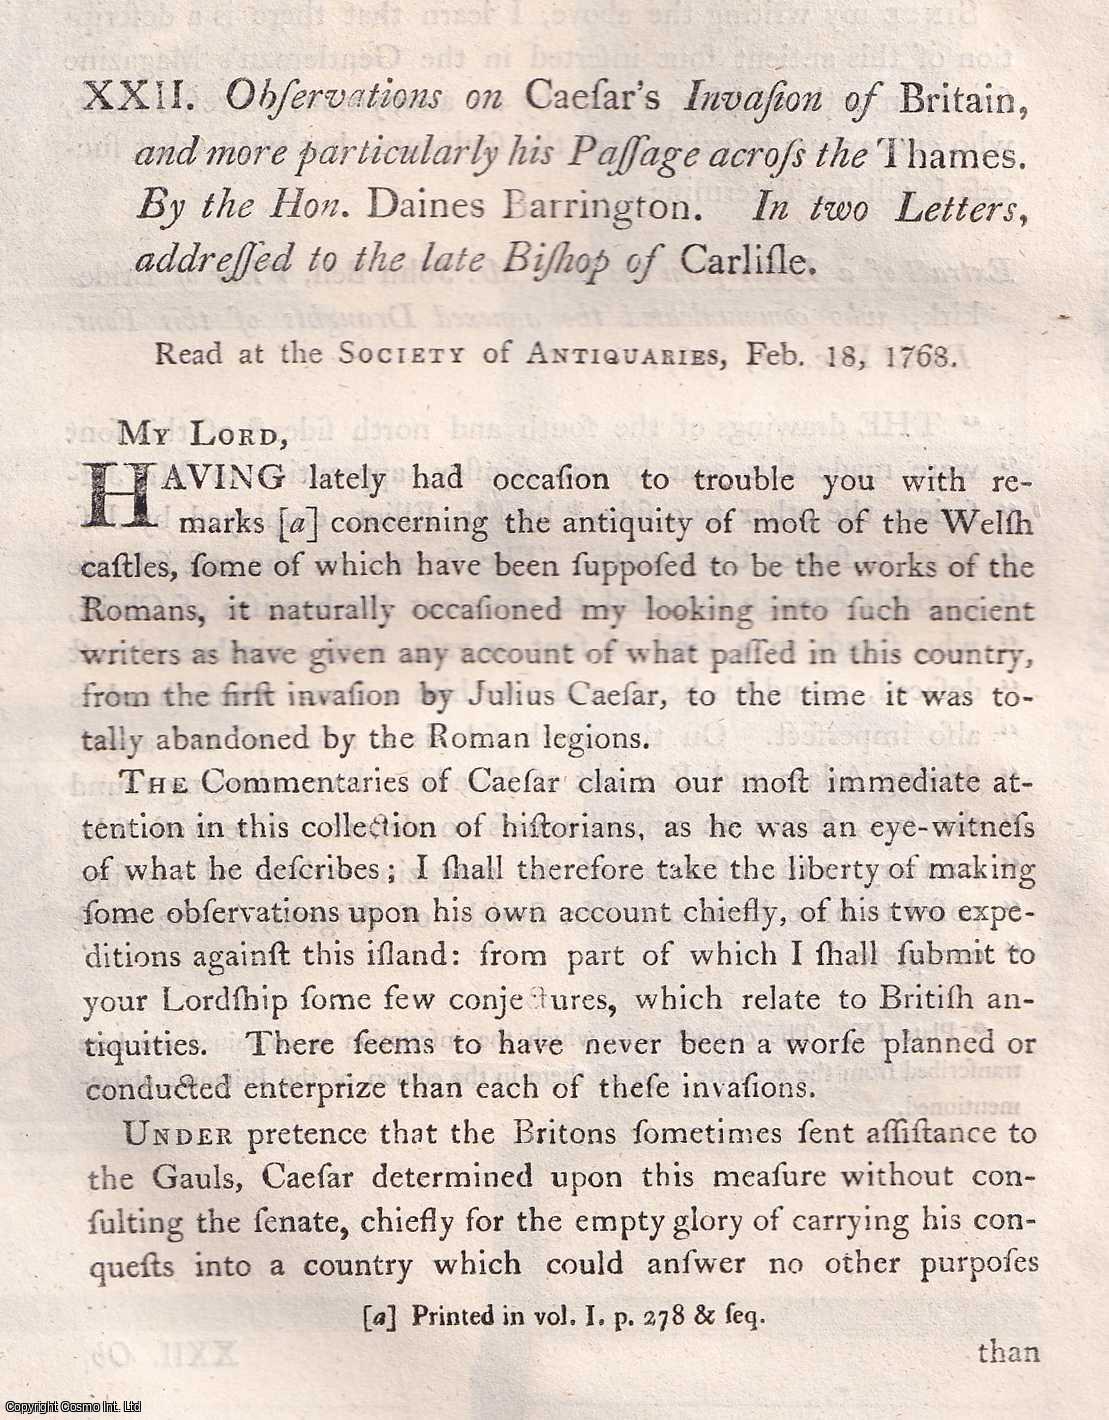 Hon. Daines Barrington - Observations on Caesar's Invasion of Britain, and more particularly his Passage across the Thames. An uncommon original article from the journal Archaeologia, 1773.